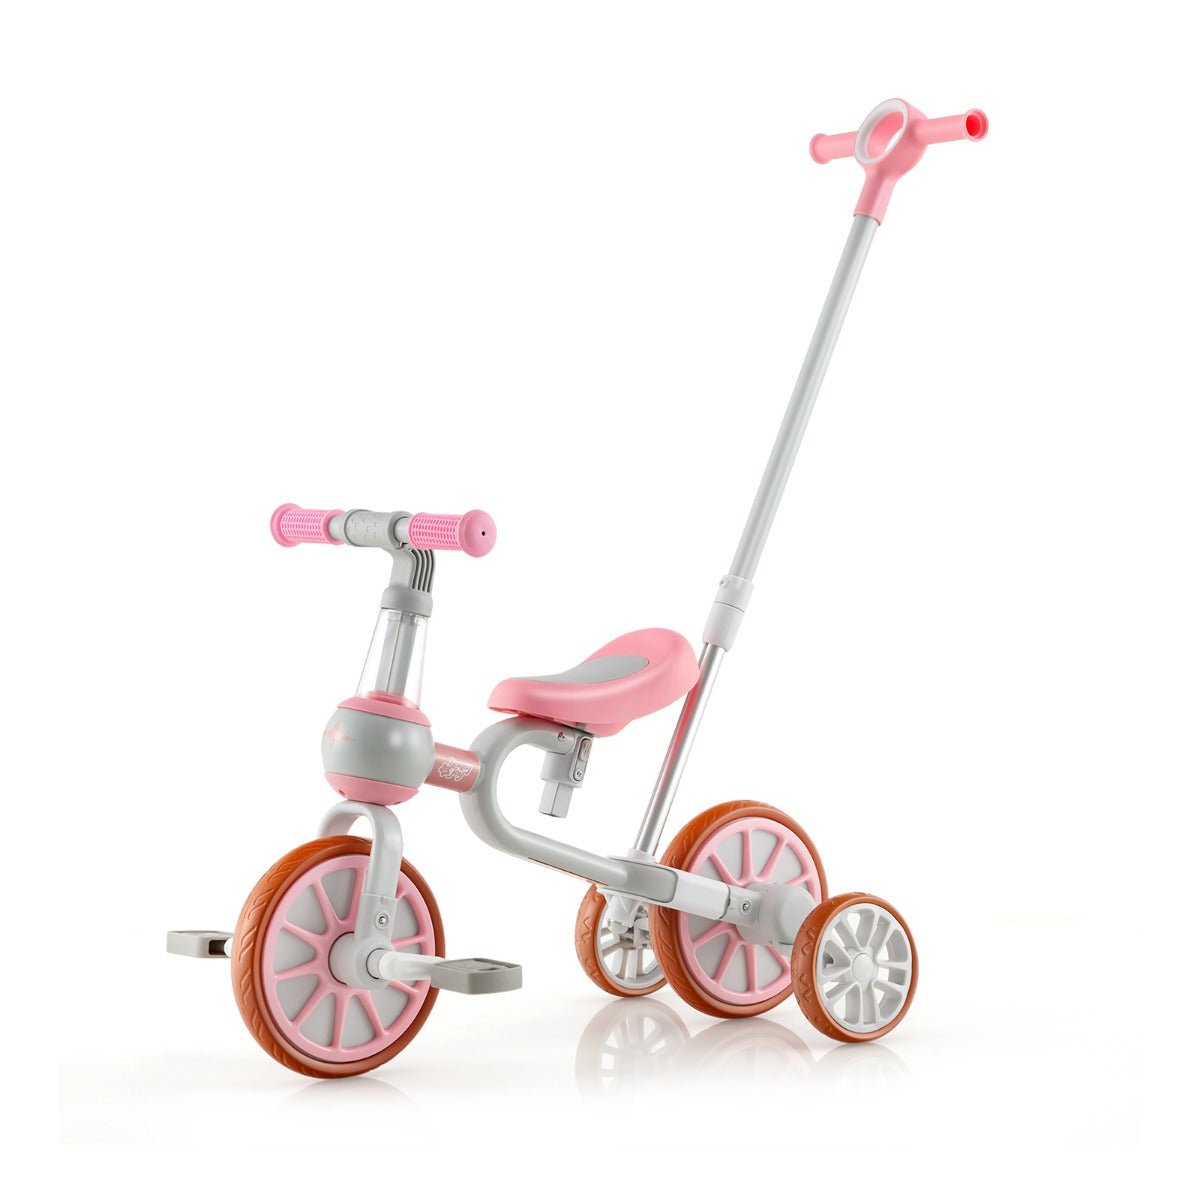 Pink 4-in-1 Kids Trike Bike - Parent Push Handle for Ages 2-4